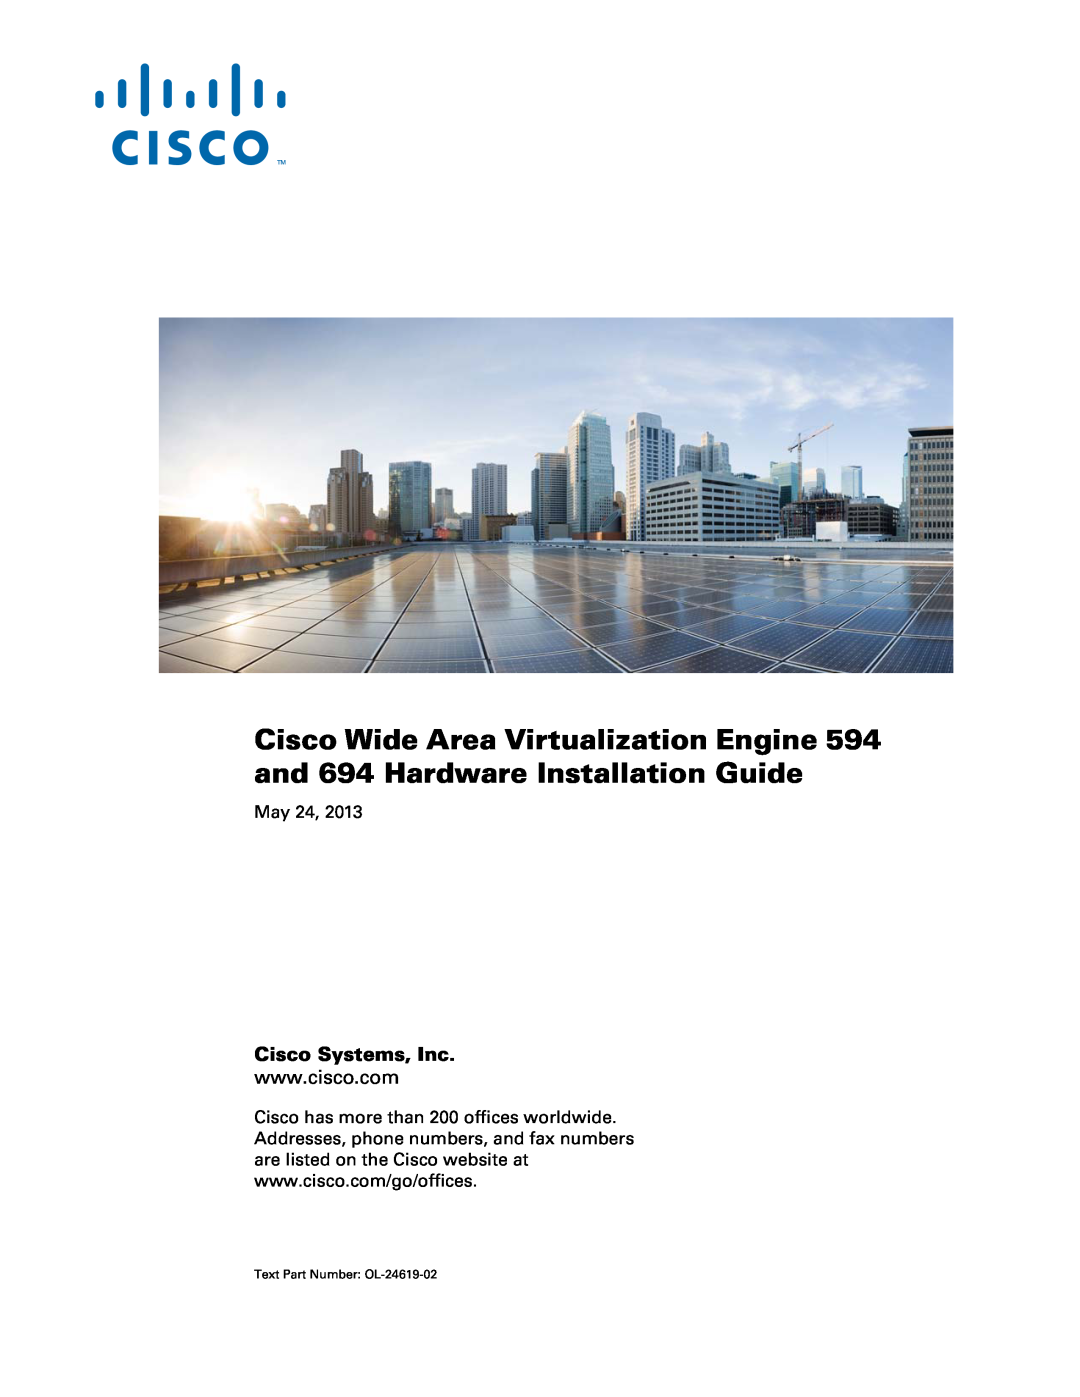 Cisco Systems WAVE594K9 appendix Maintaining Your Site Environment, page B-1, Using Power Protection Devices, page B-5 